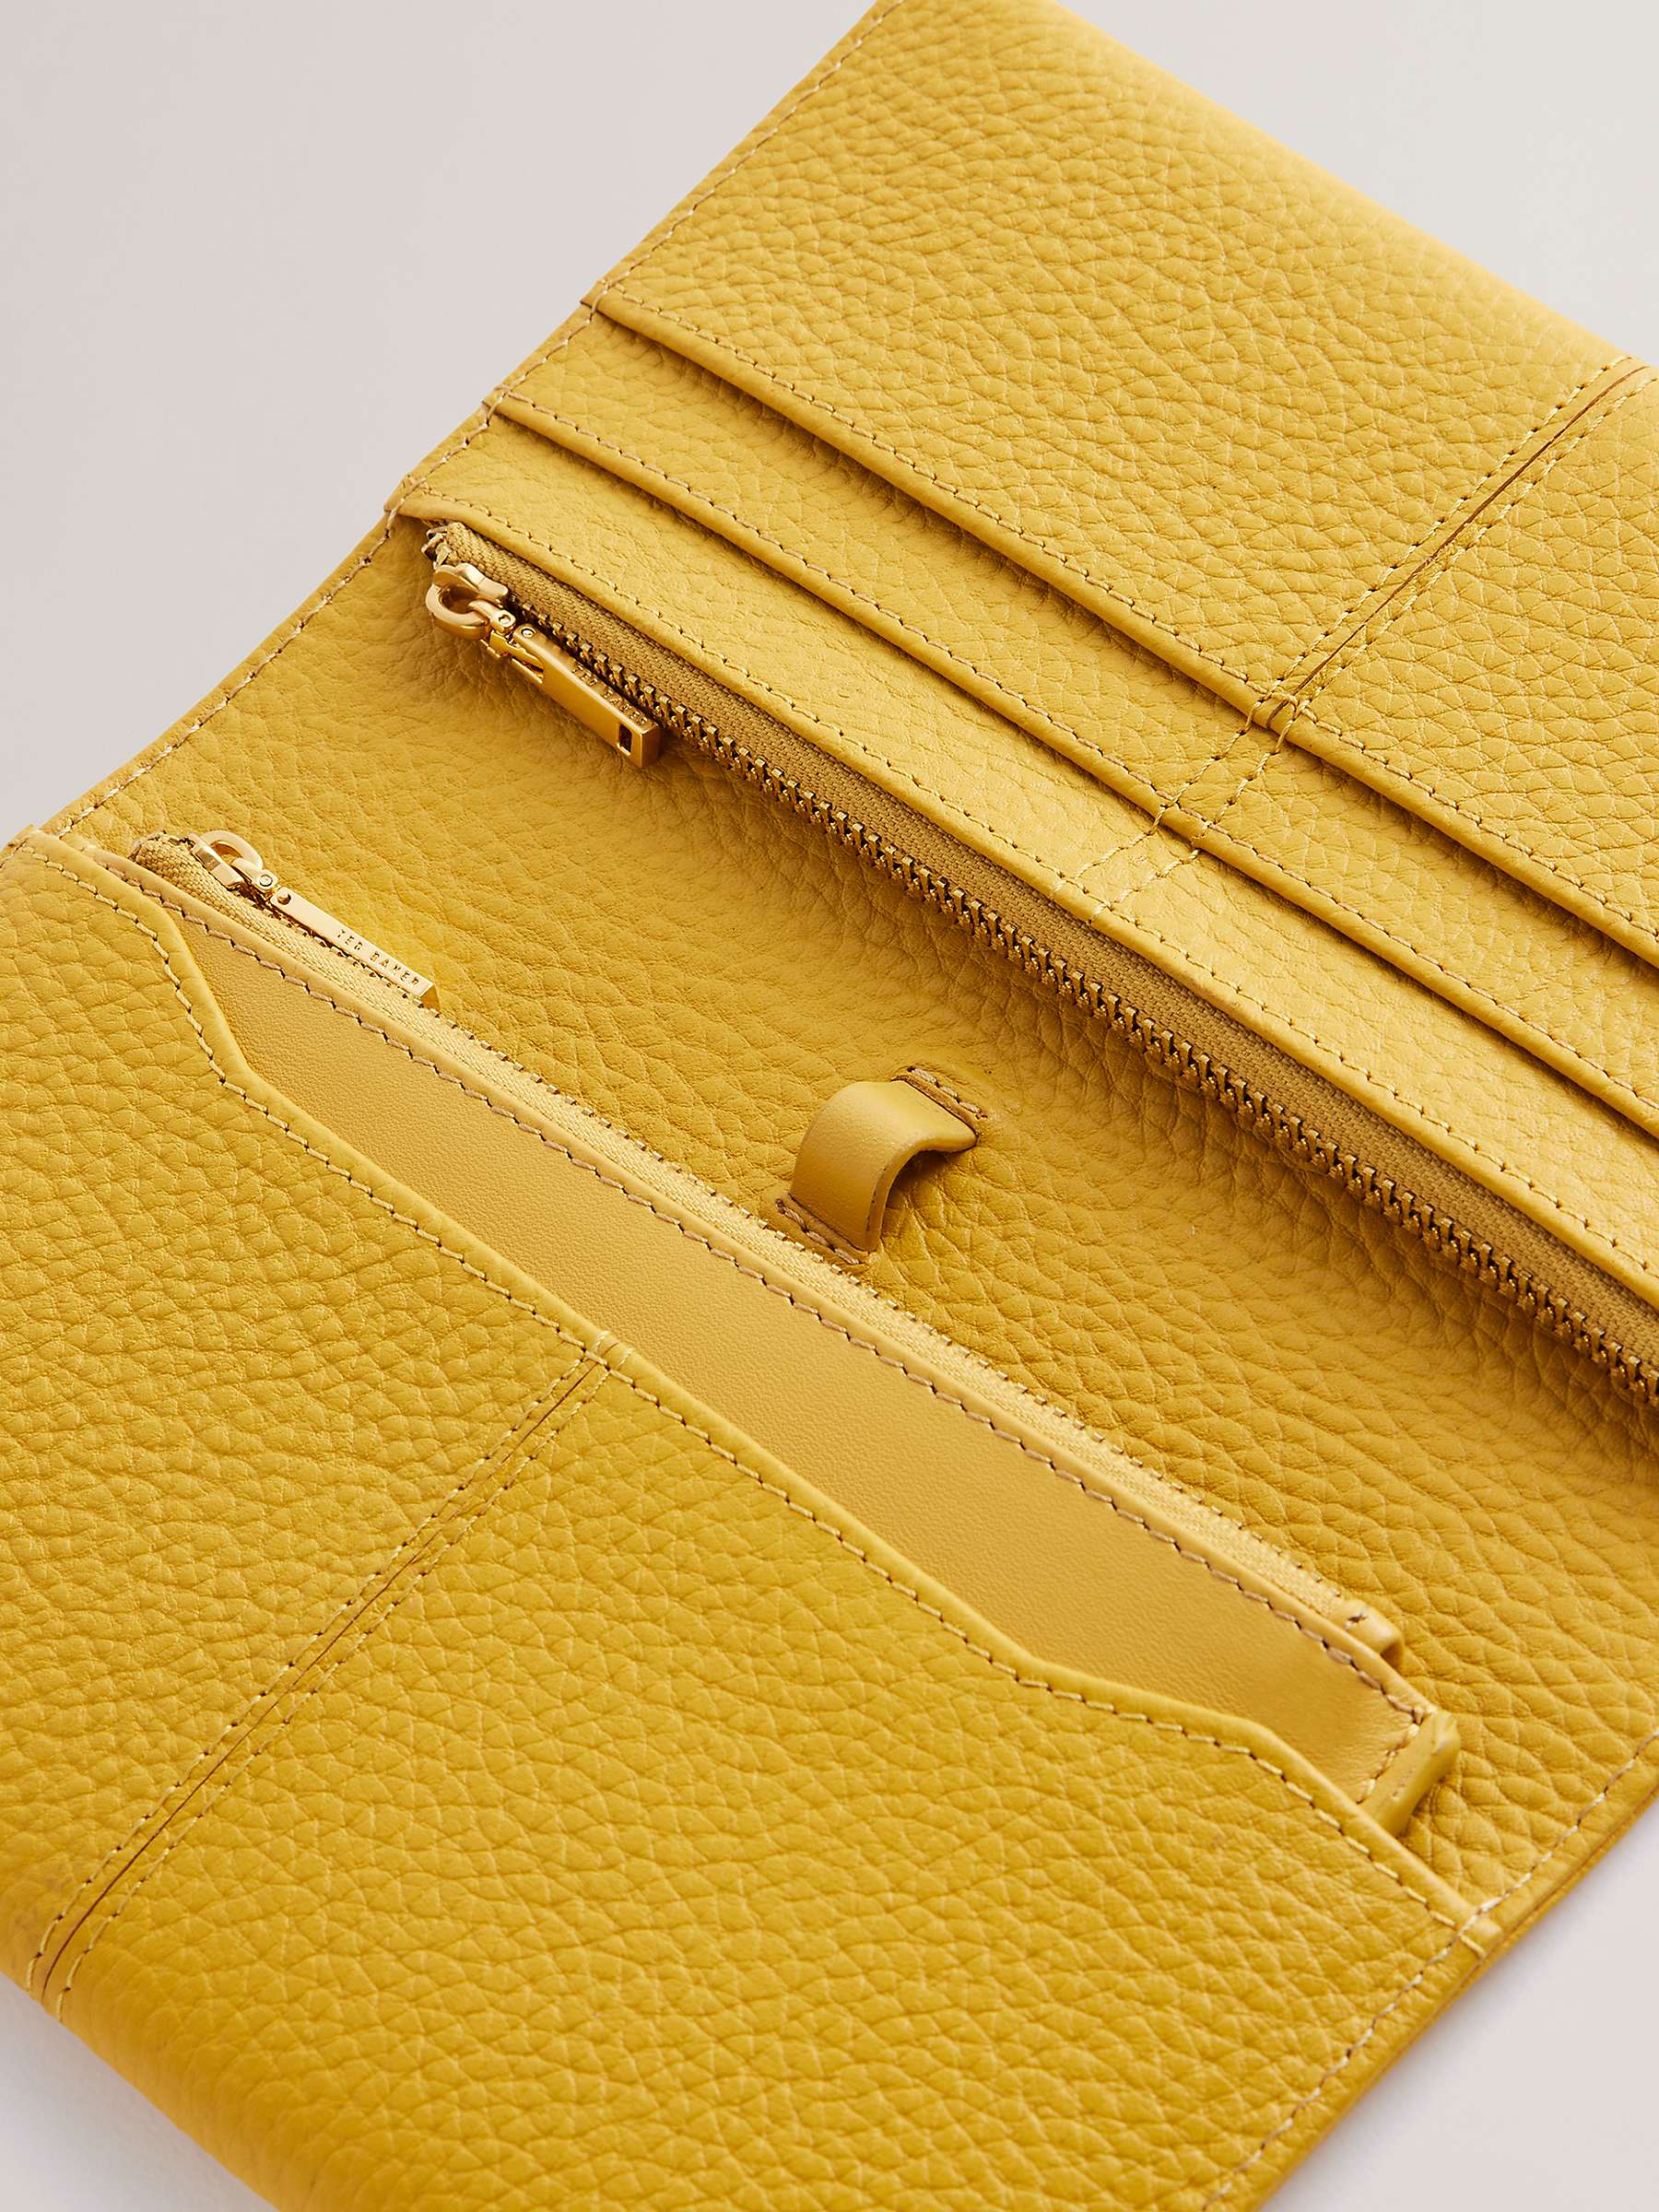 Buy Ted Baker Nishi Soft Grainy Leather Fold Purse, Yellow Dark Online at johnlewis.com